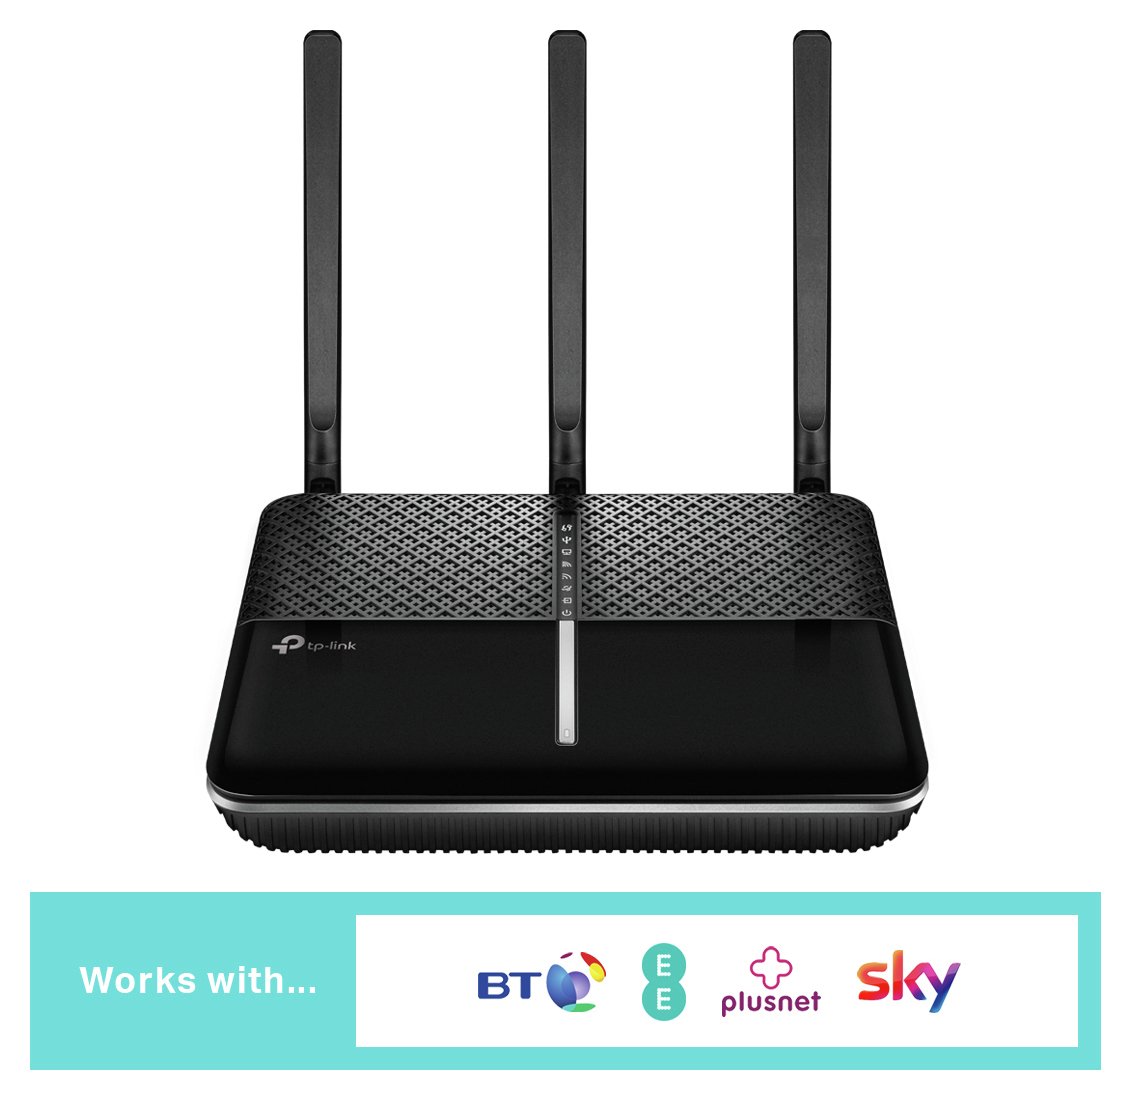 TP-Link AC1600 Dual-Band Wi-Fi VDSL/ADSL Modem Router Review